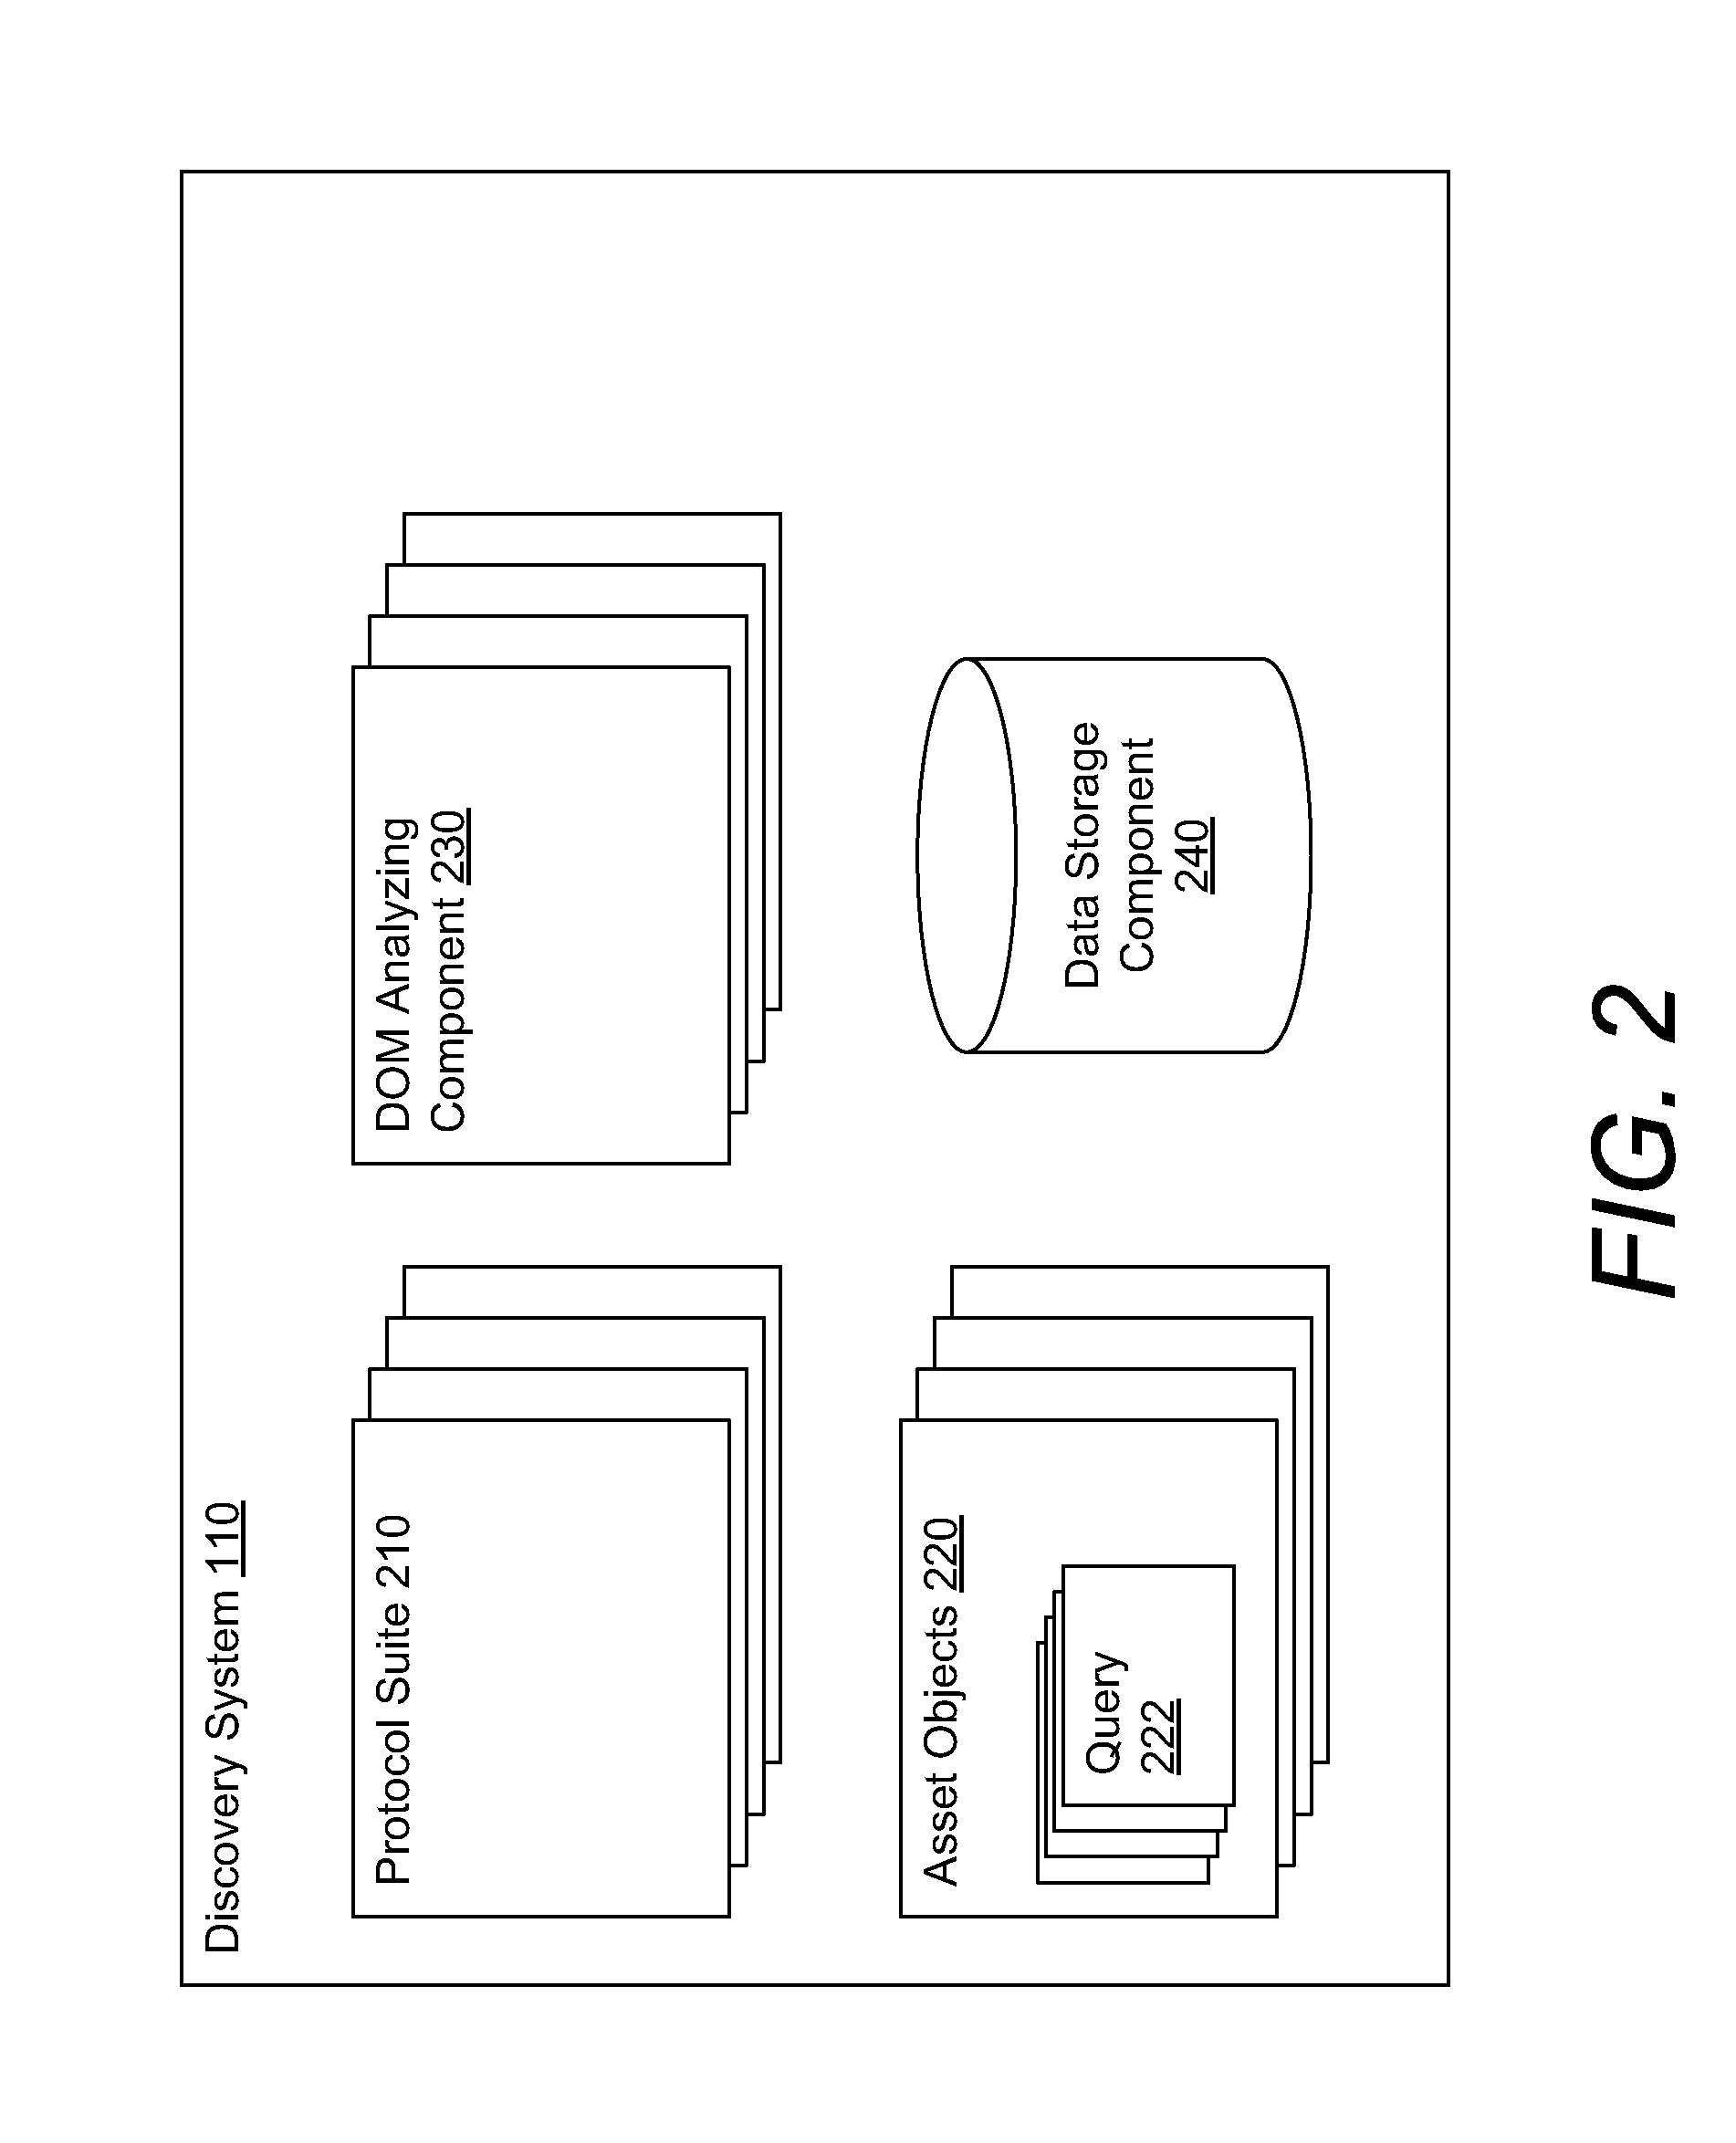 System and Method for Discovering Assets and Functional Relationships in a Network